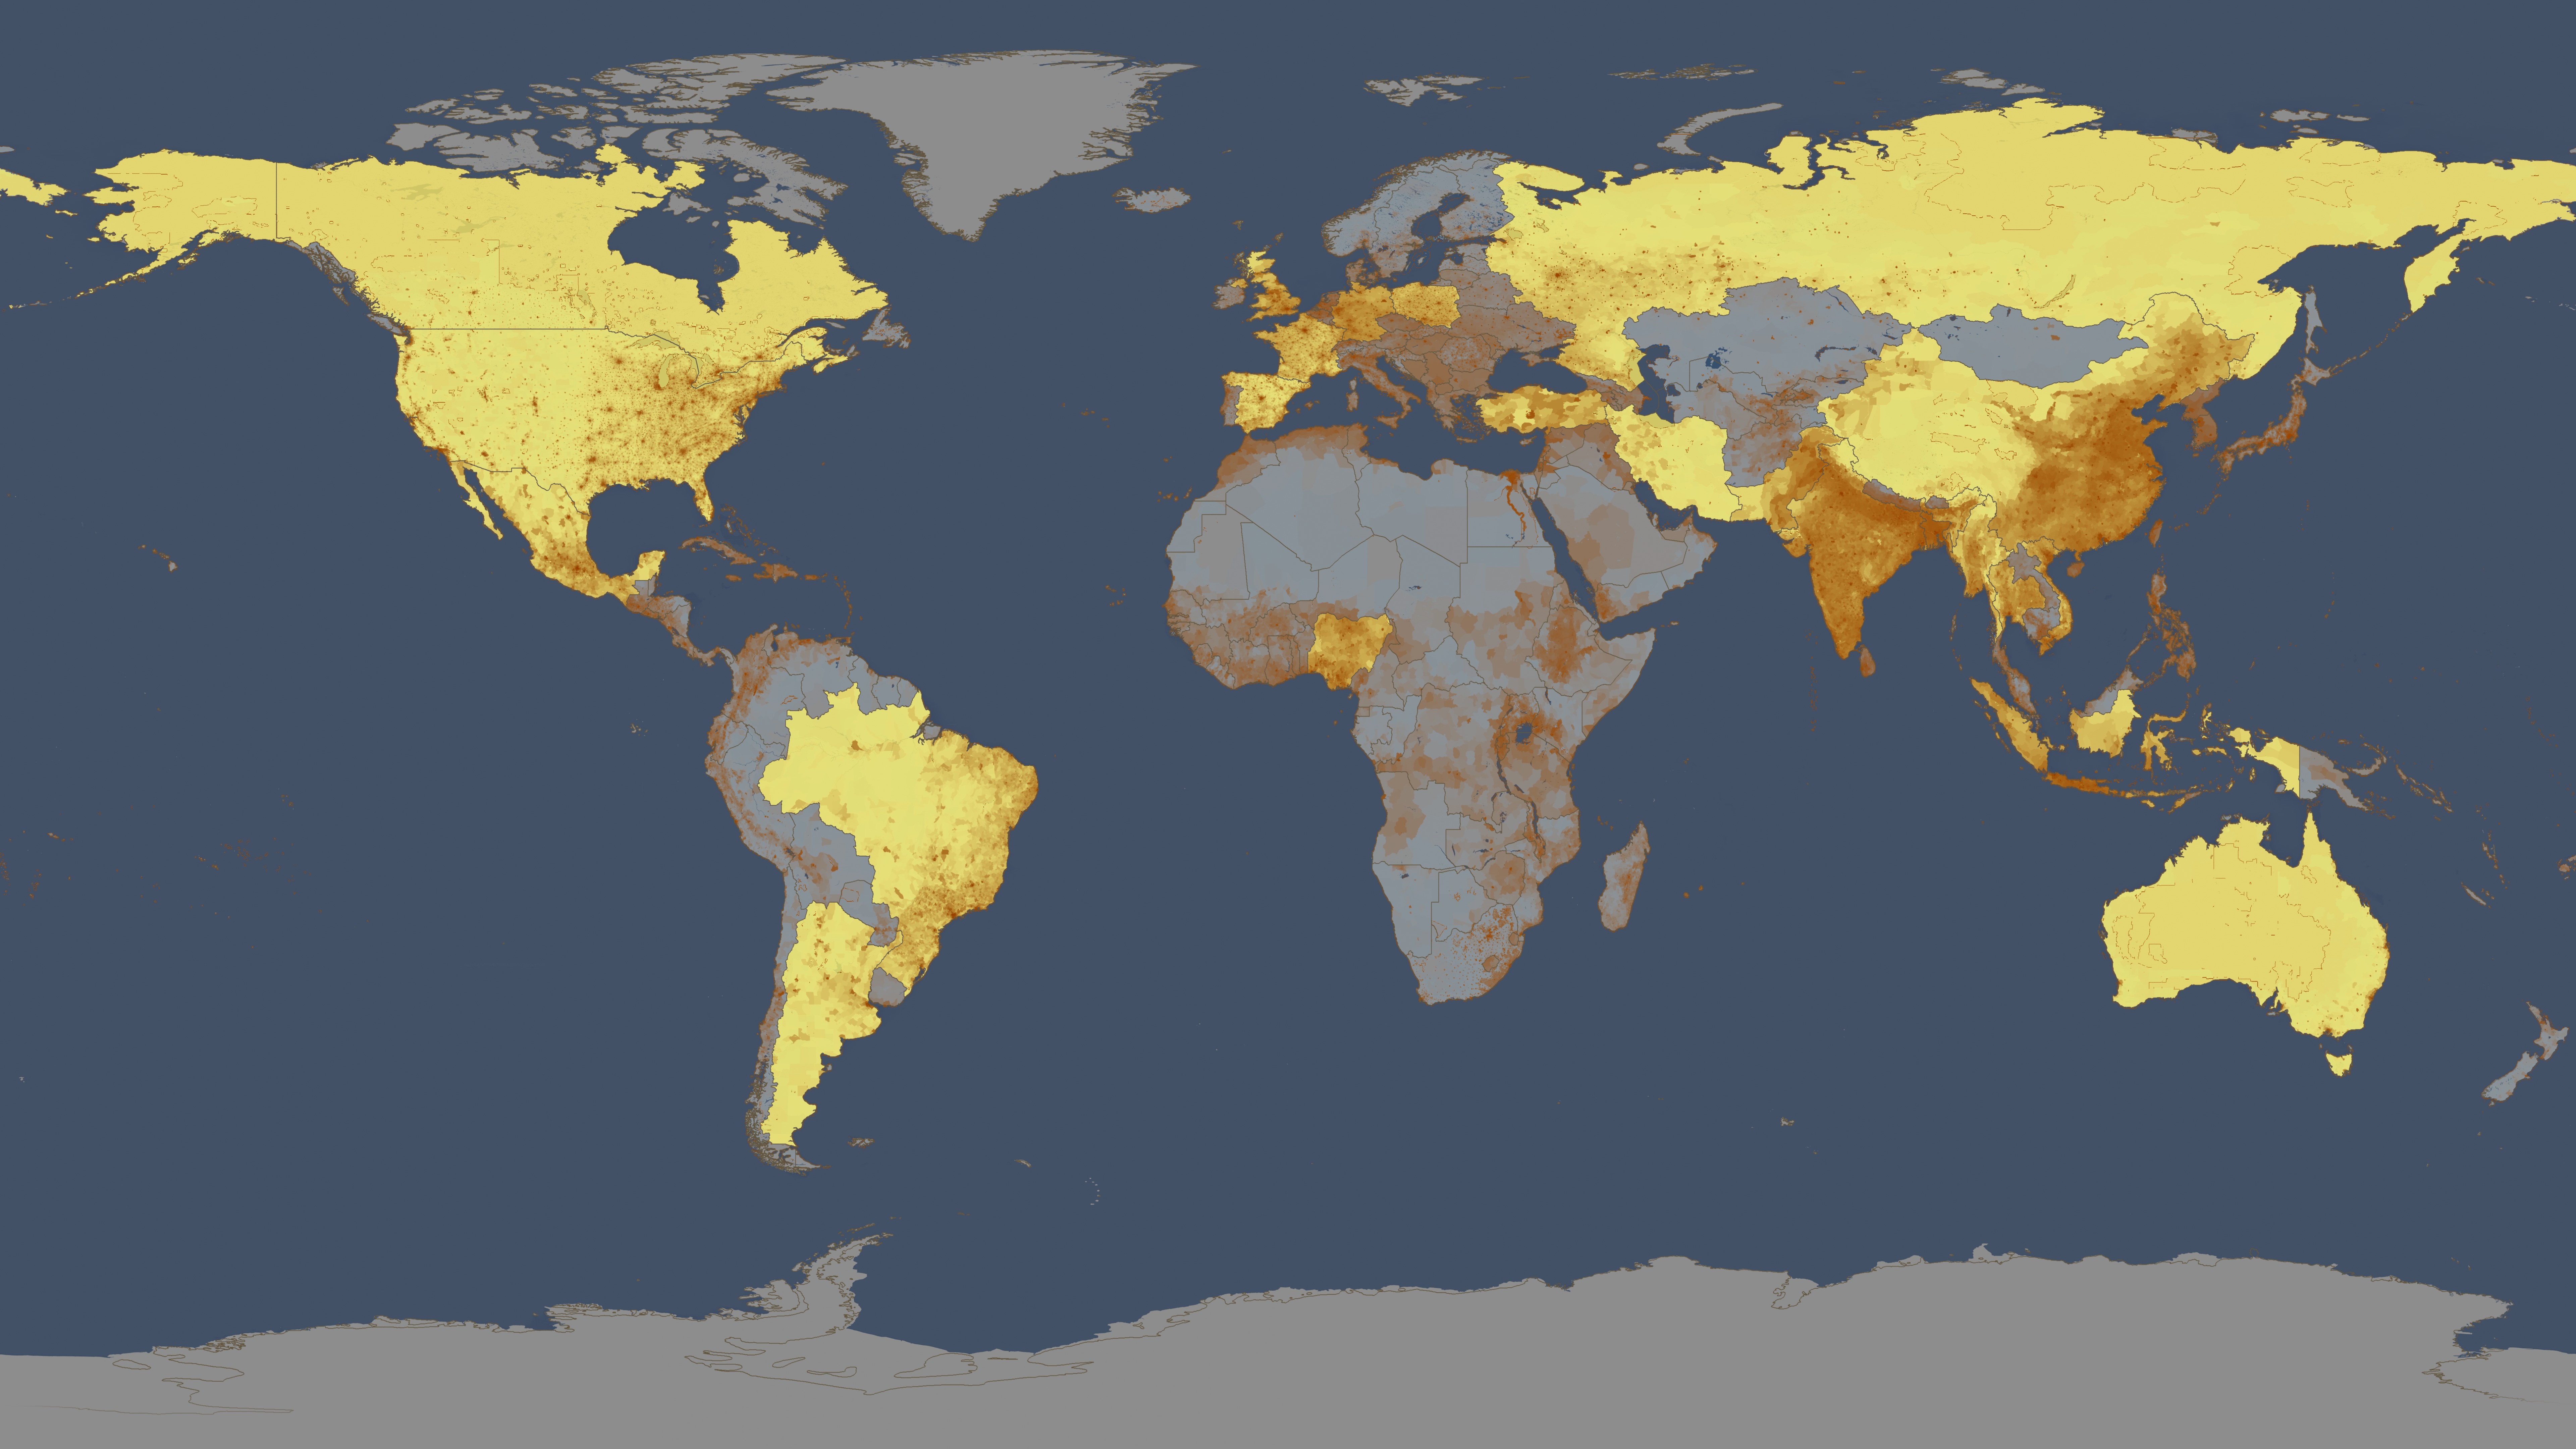 The countries that produced 82% of the world's cereals (grain,oats,wheat,rice,maize, millet, sorghum) in 2008 are shown in yellow and the world population is shown in brown.  This version of the image does not have topography.